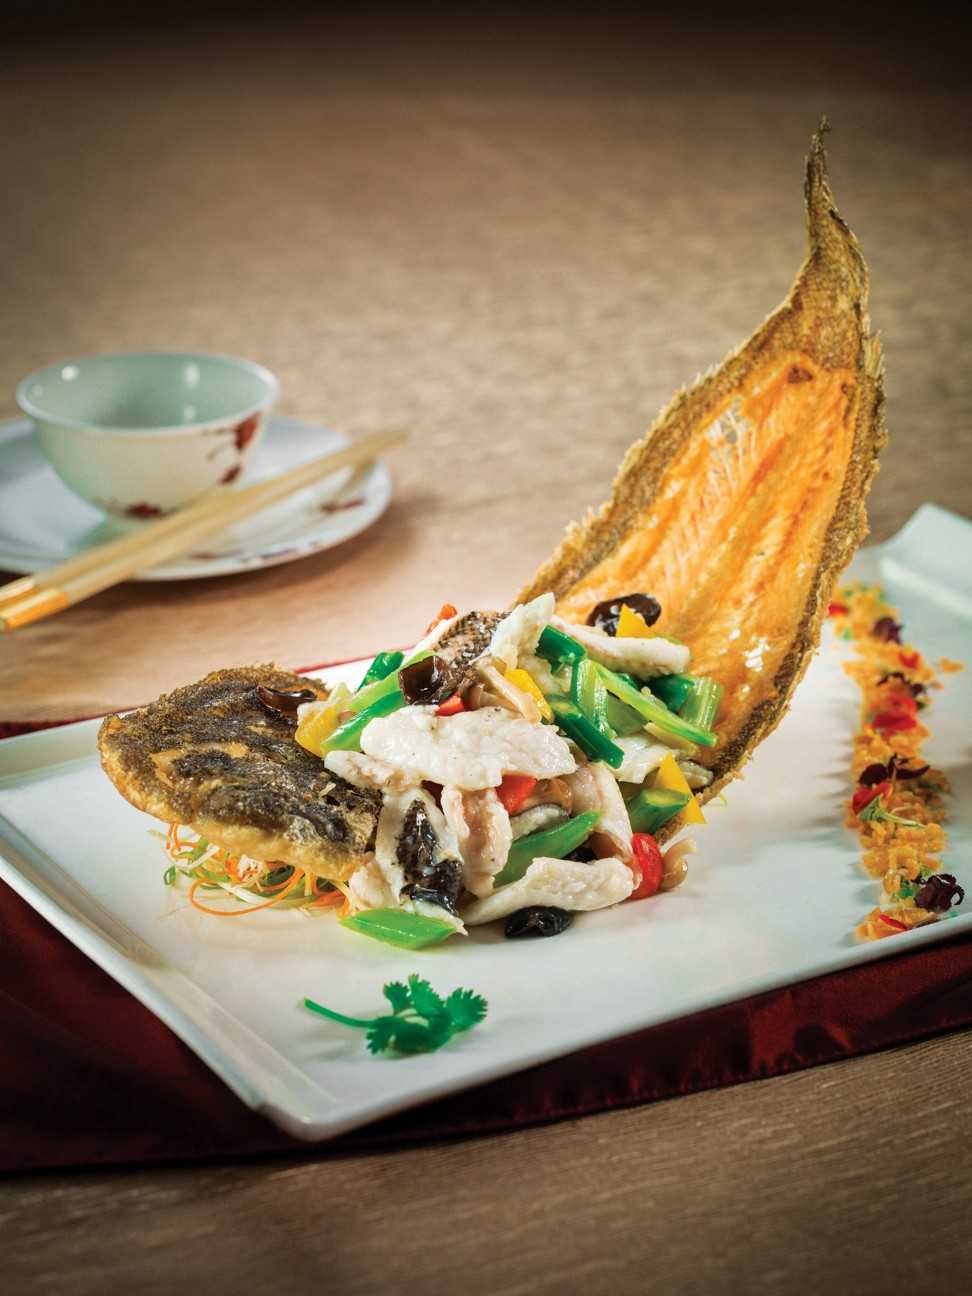 Sautéed and fried Macao sole served at Golden Court at Sands Macao